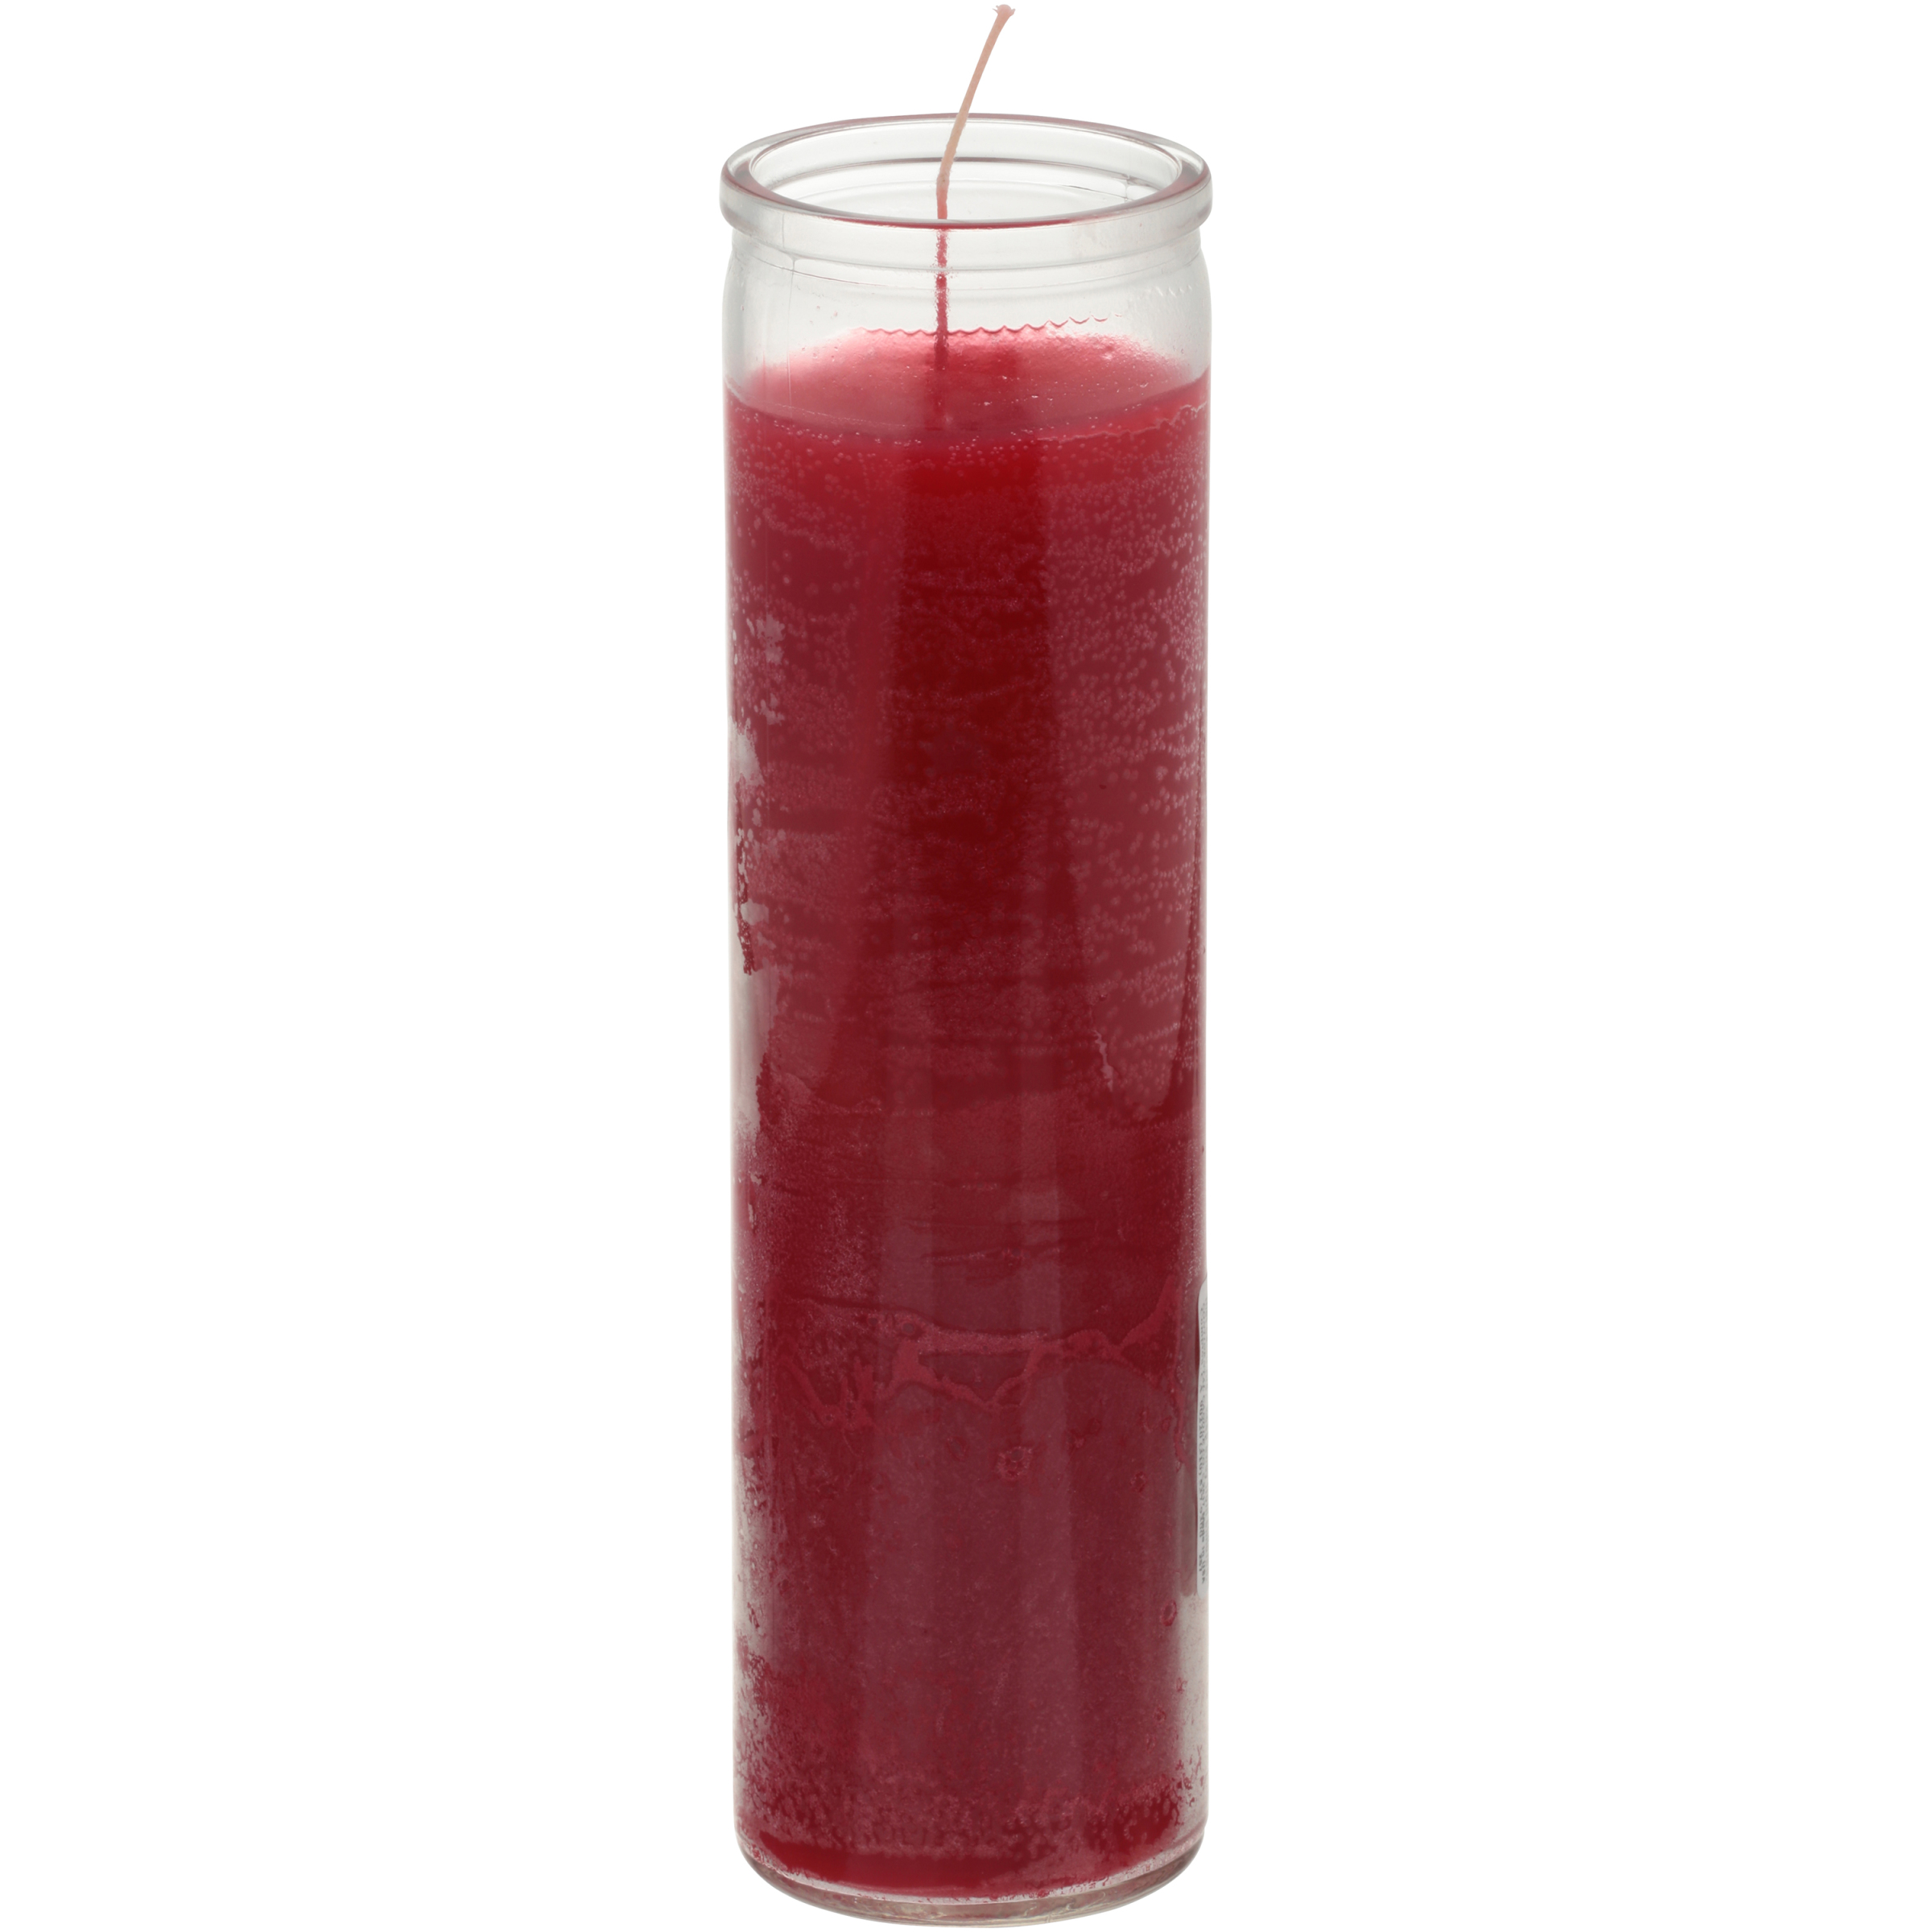 Sanctuary Solid Color Church Candles, 12 pack - image 3 of 9